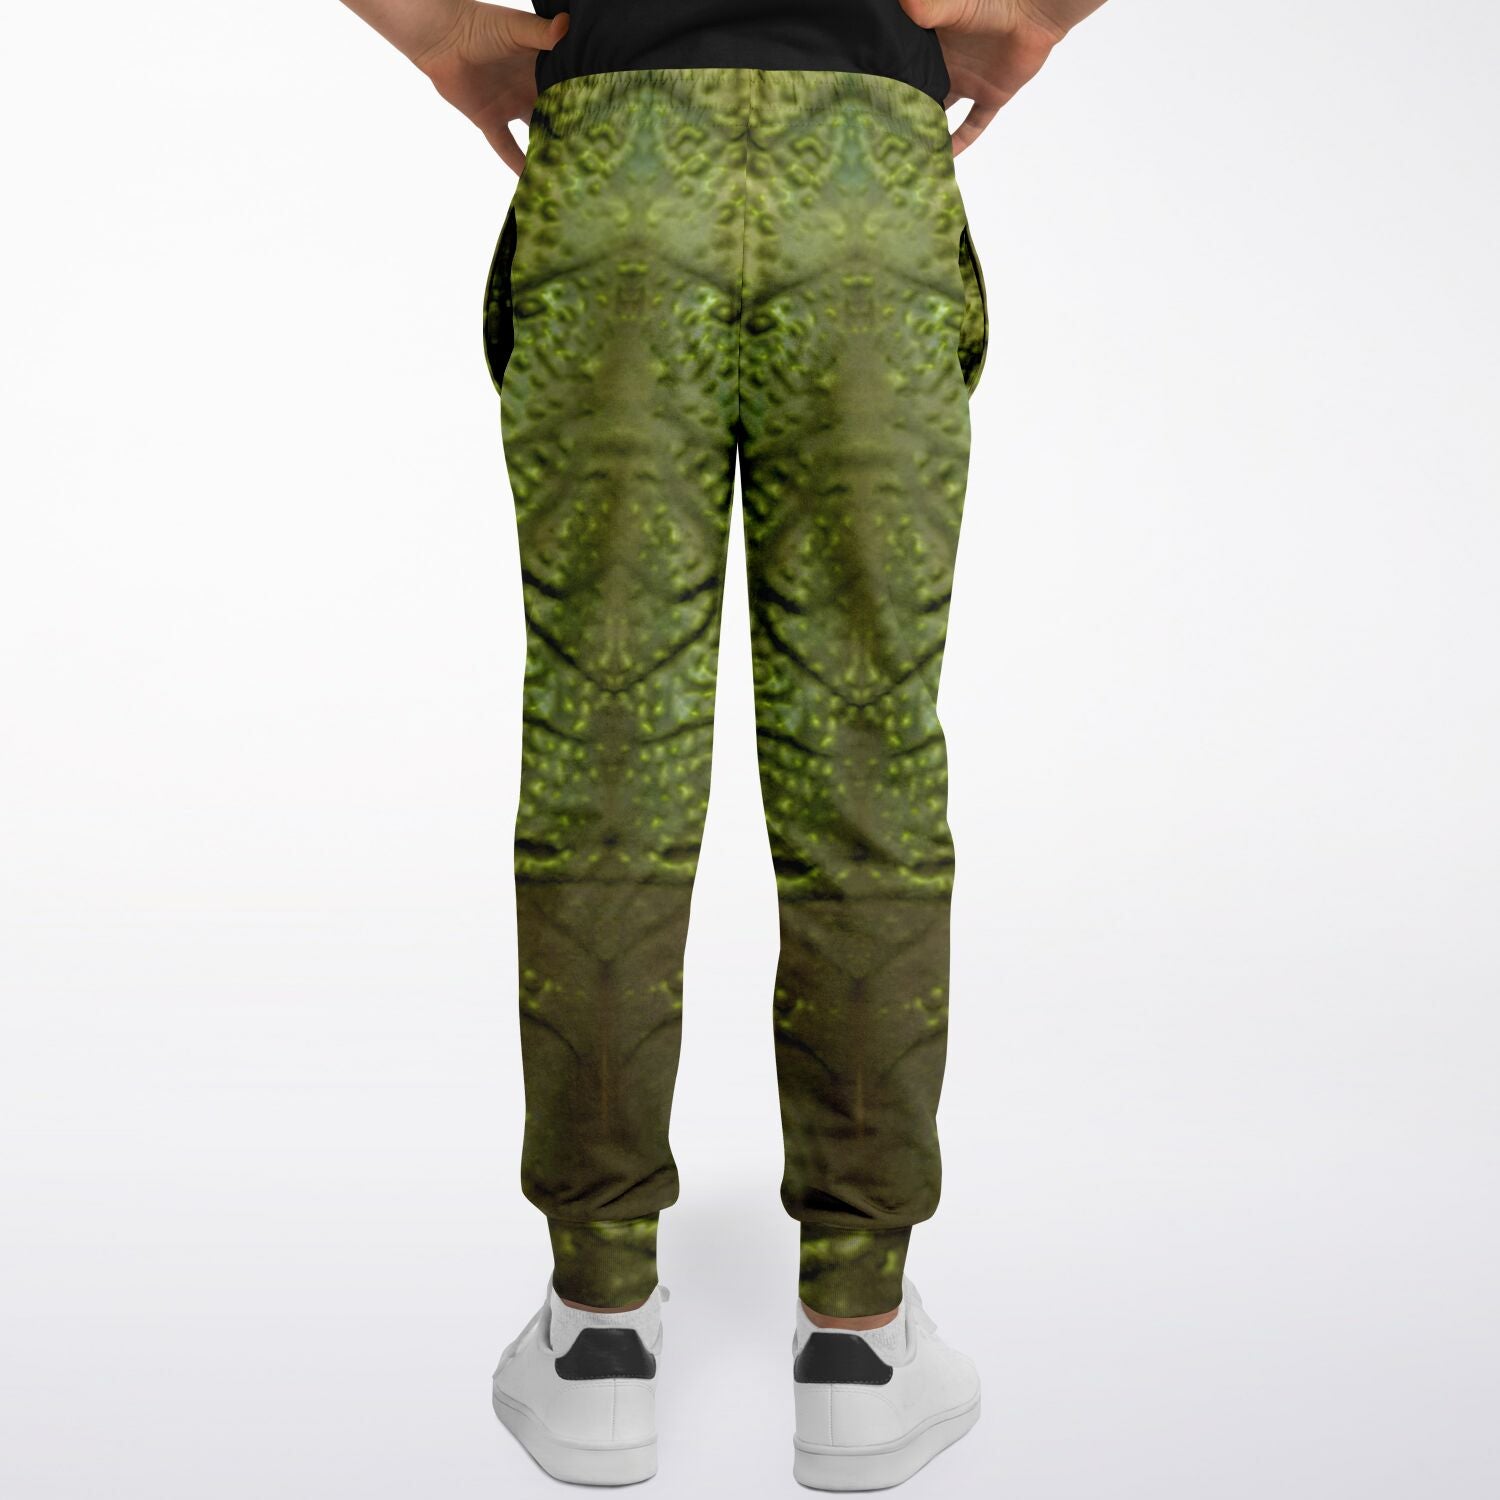 Creature From The Black Lagoon Inspired Kids' Joggers